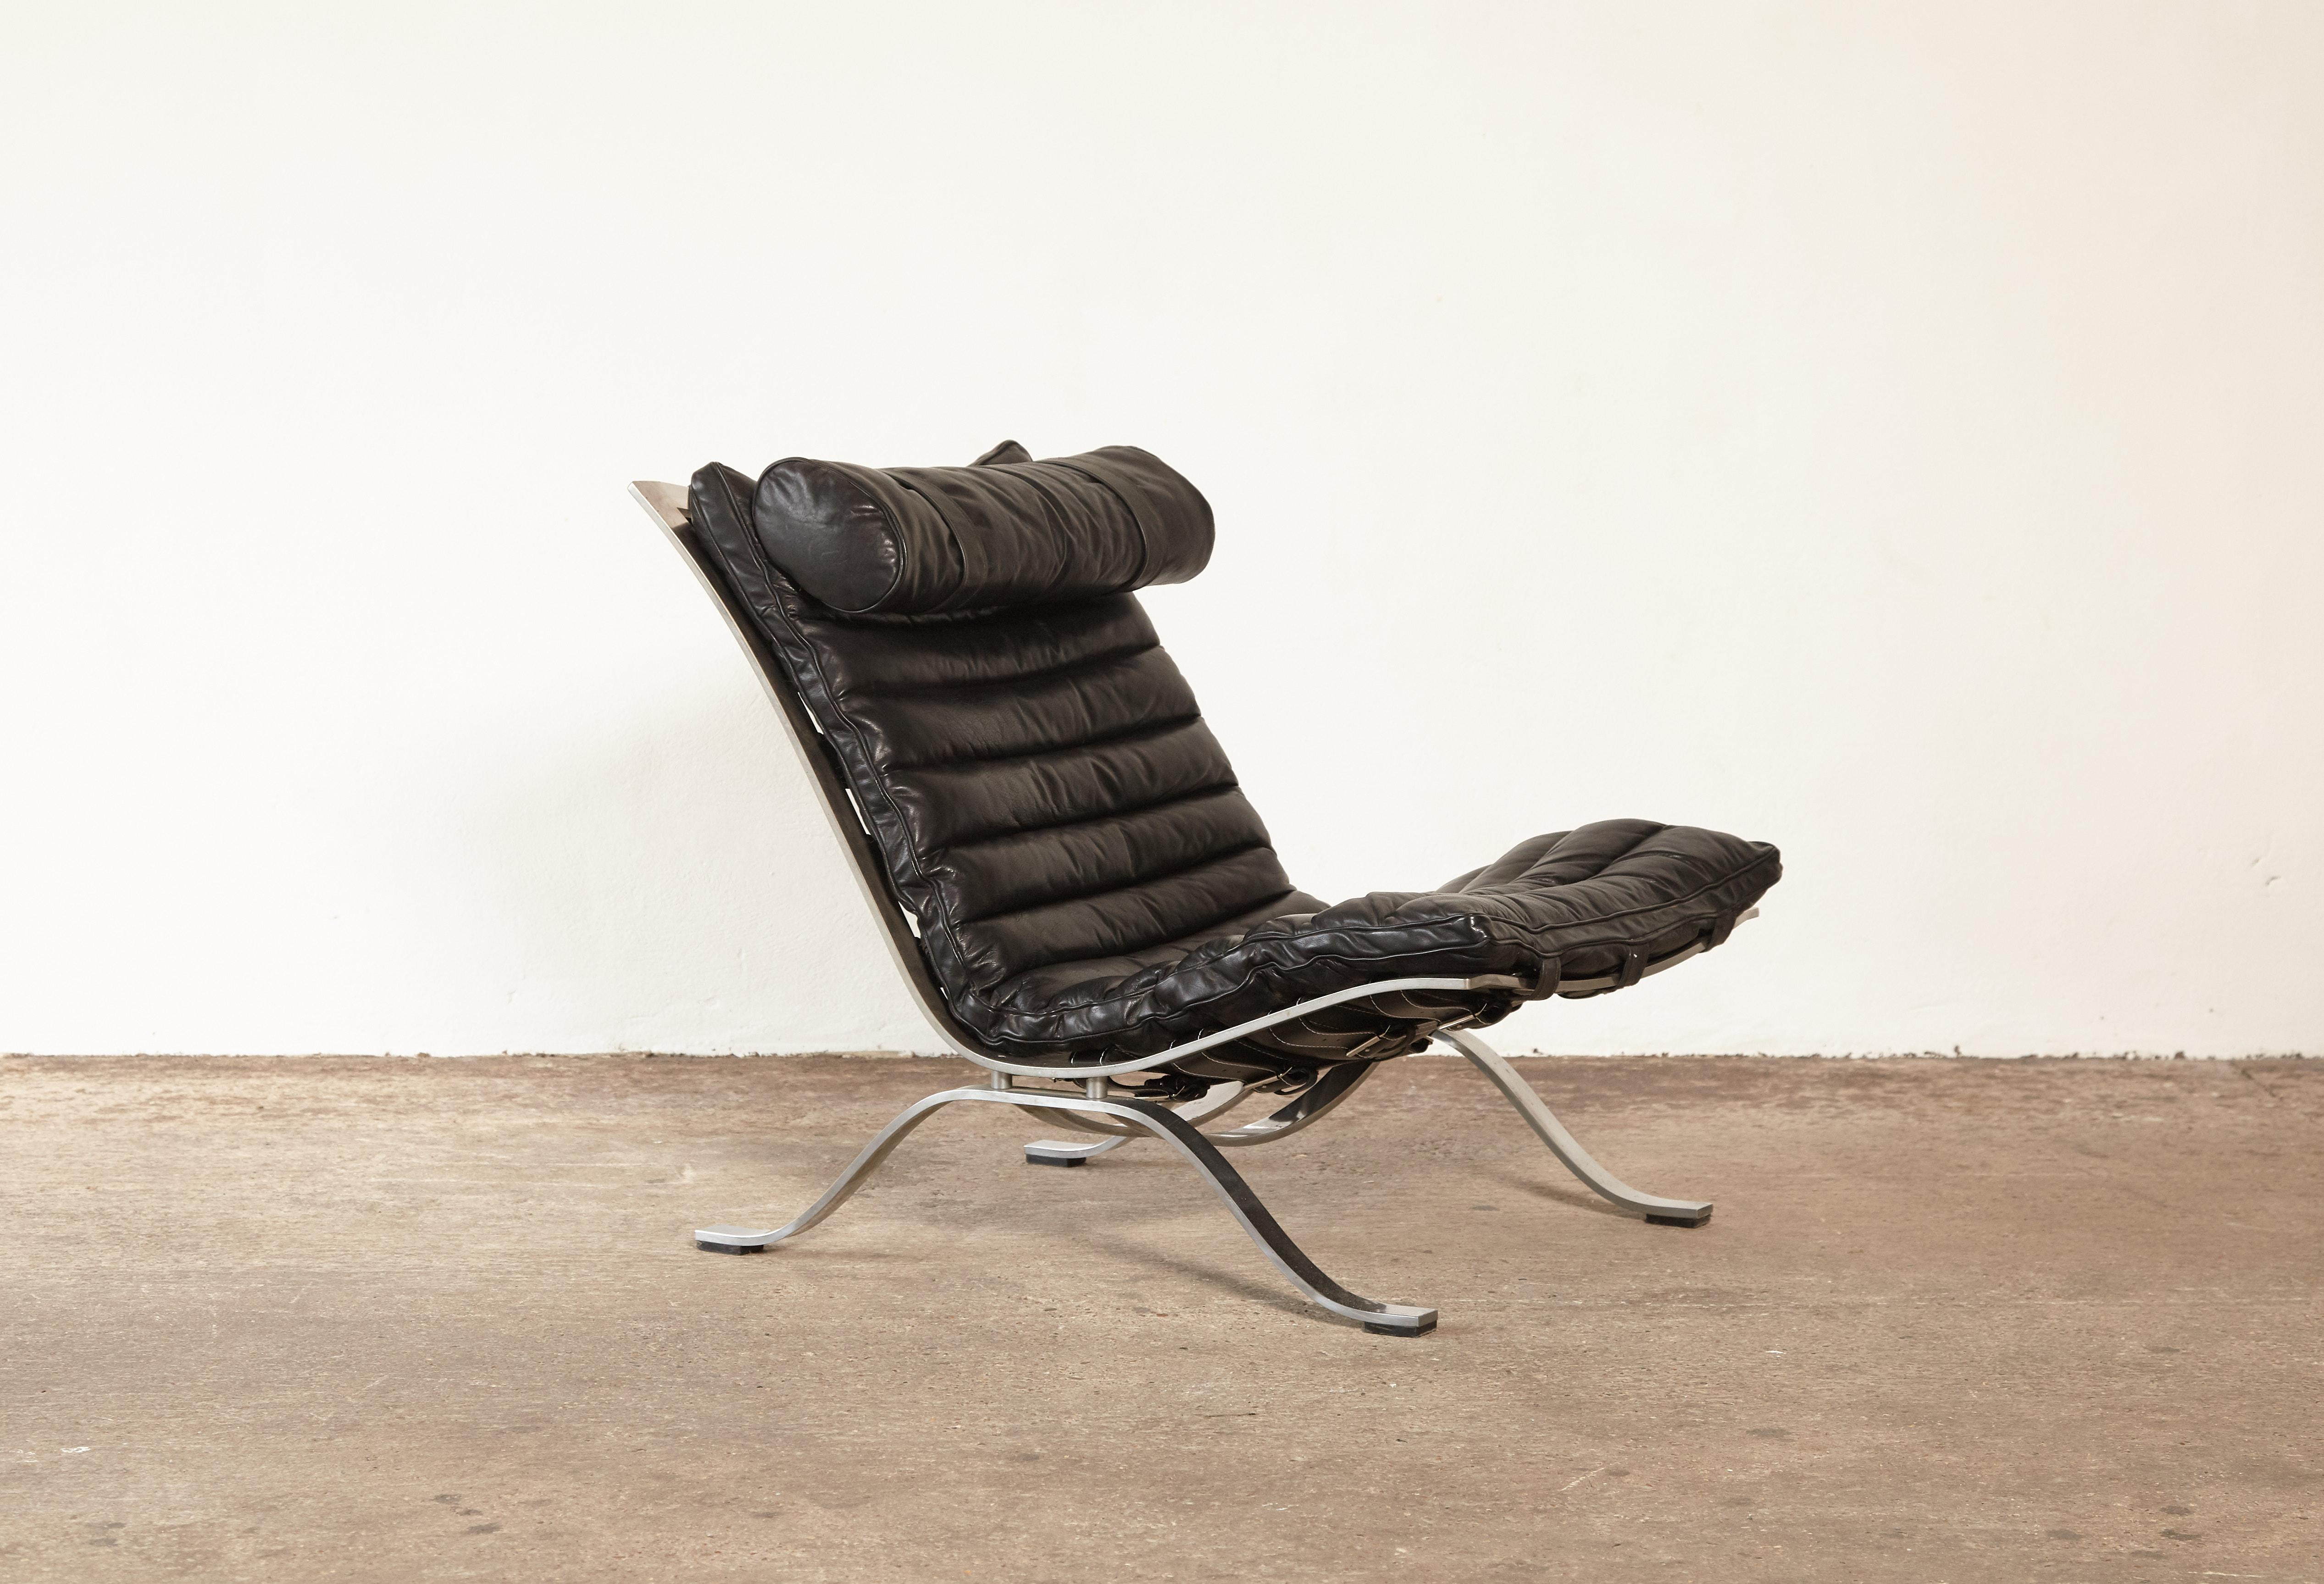 Black leather Ari lounge chair, 1970s, Sweden, designed by Arne Norell for Norell Mobel AB, Sweden. In good condition with minor marks to buffalo leather, no tears or cracks.